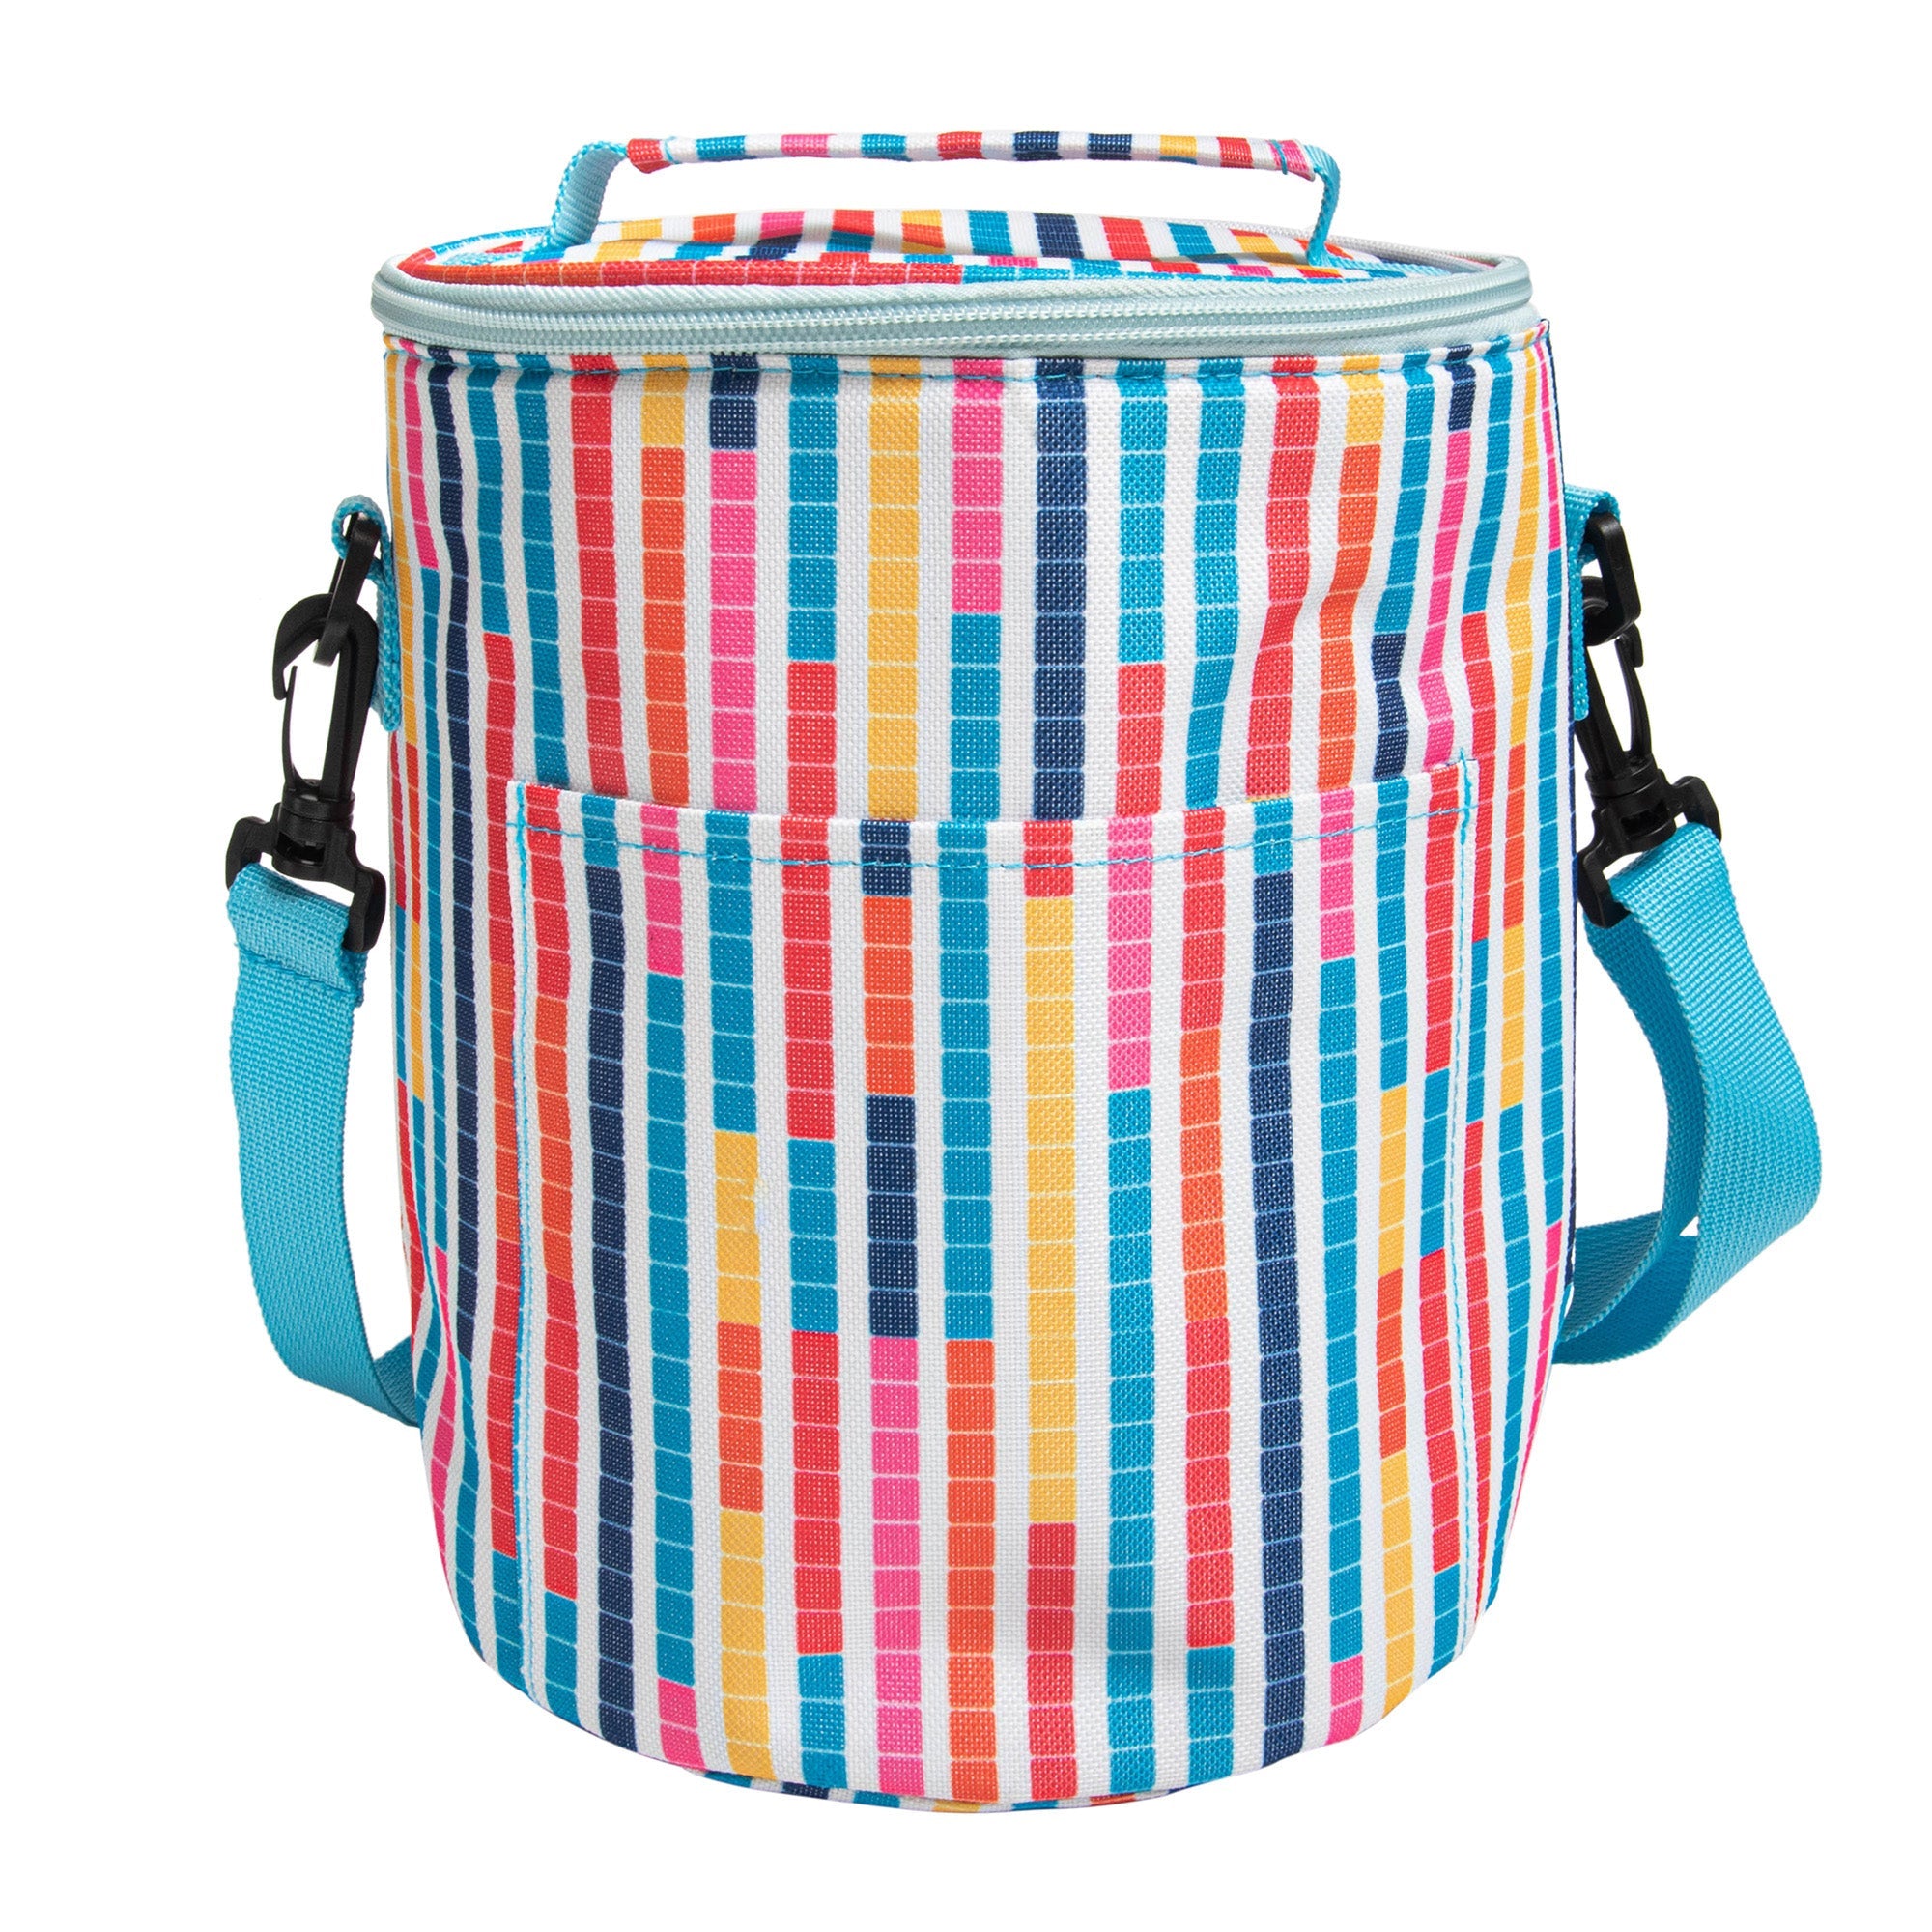 Insulated Beach Bag Tile Print  Outside: 100% Polyester  Lining Aluminium Pvc 6.7x9.5in  17x24cm